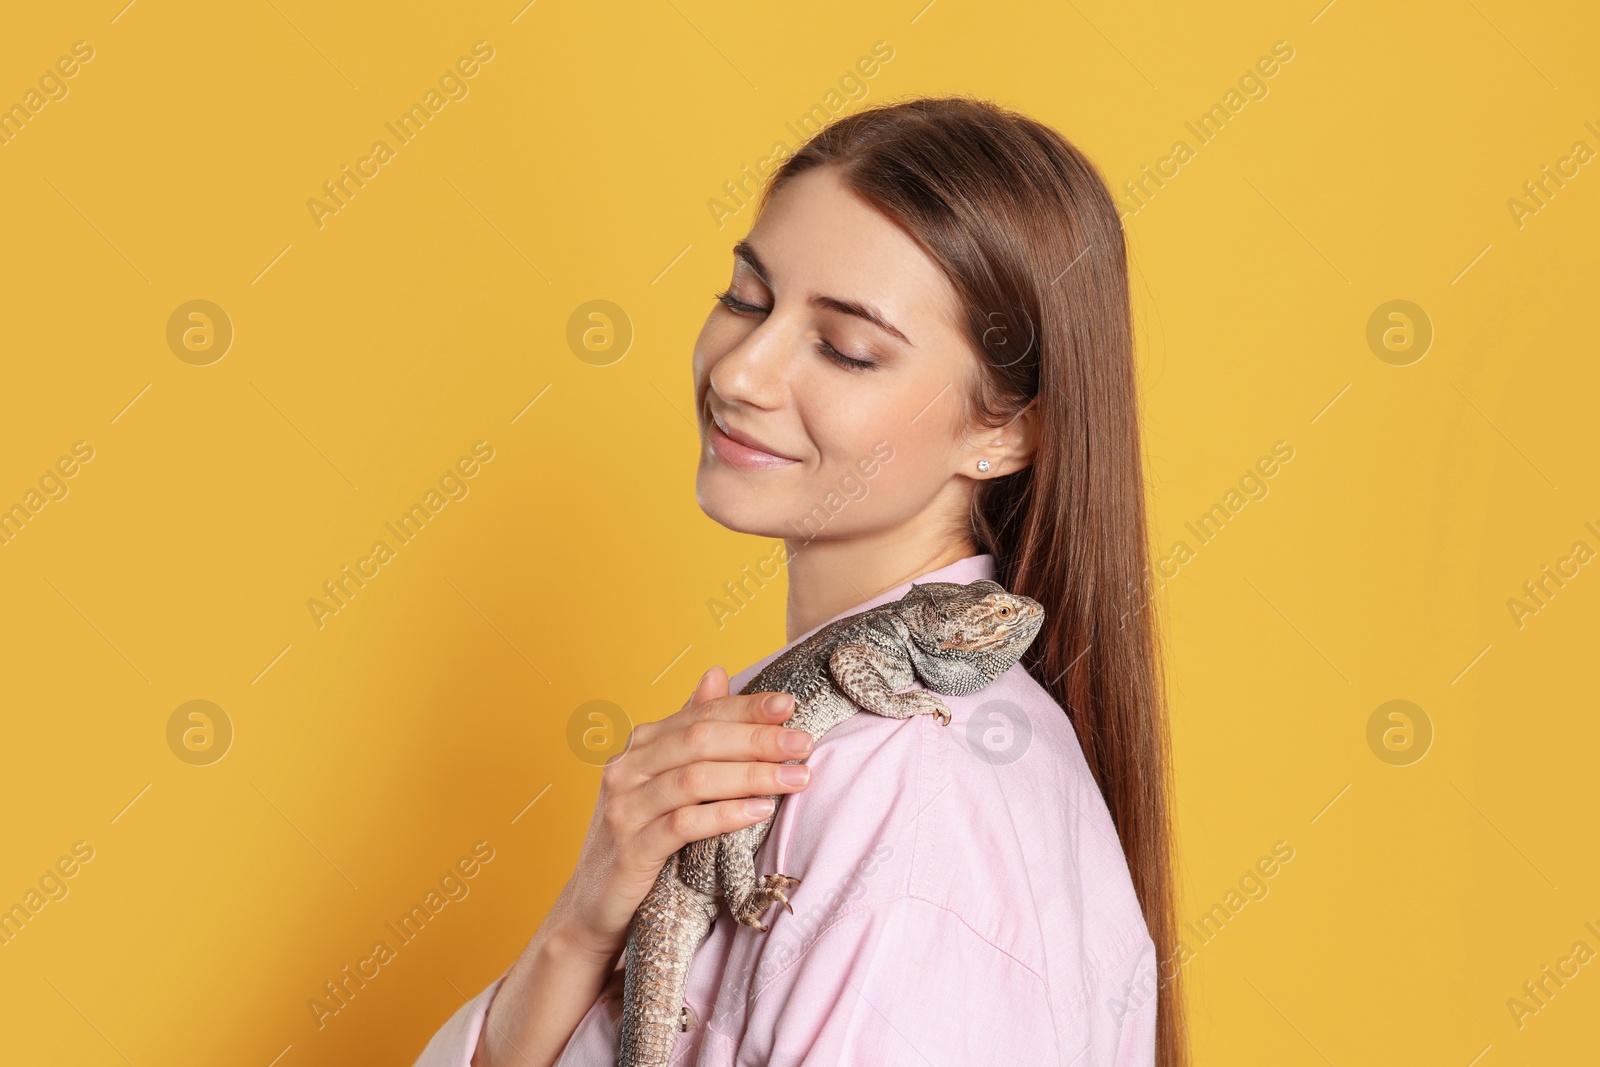 Photo of Woman holding bearded lizard on yellow background. Exotic pet